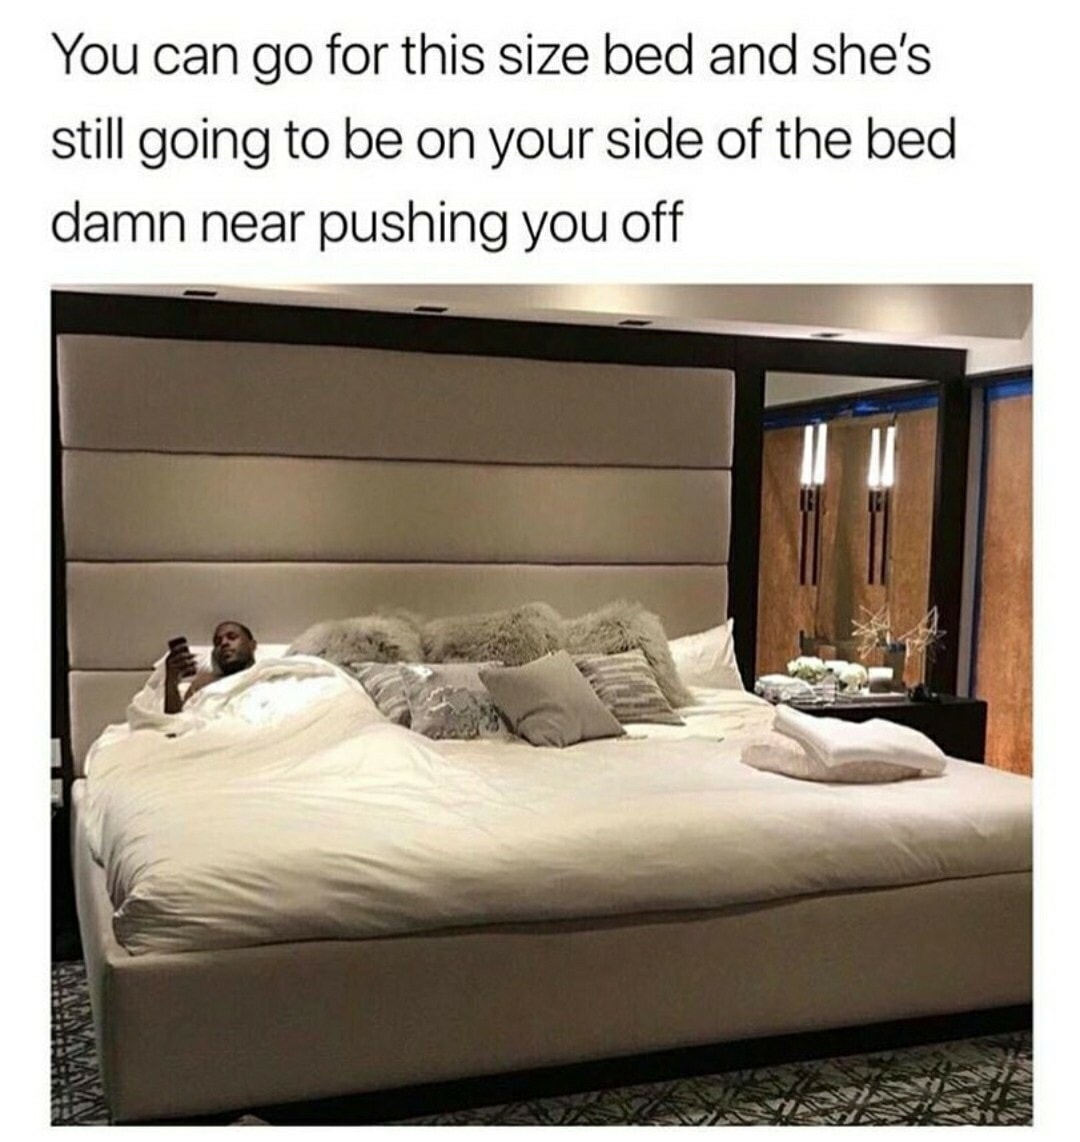 you can have a bed this big - You can go for this size bed and she's still going to be on your side of the bed damn near pushing you off